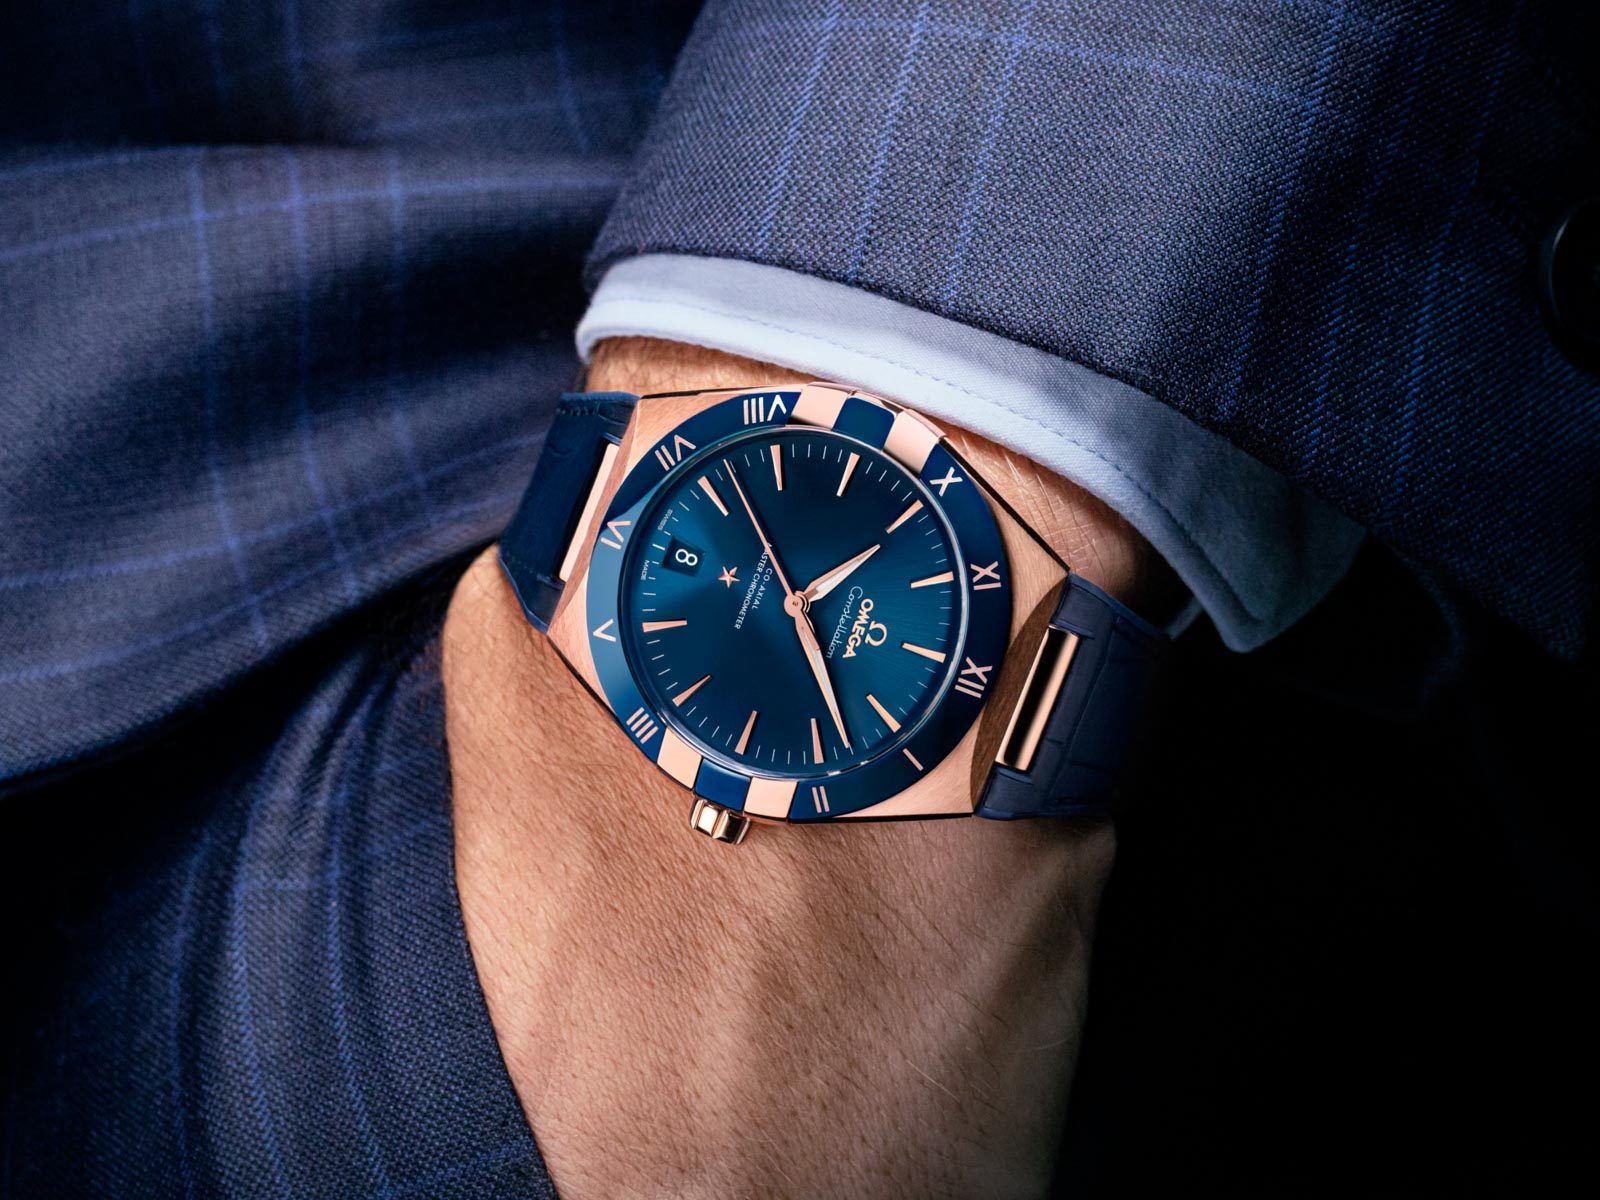 The blue strap fake watch has blue dial.